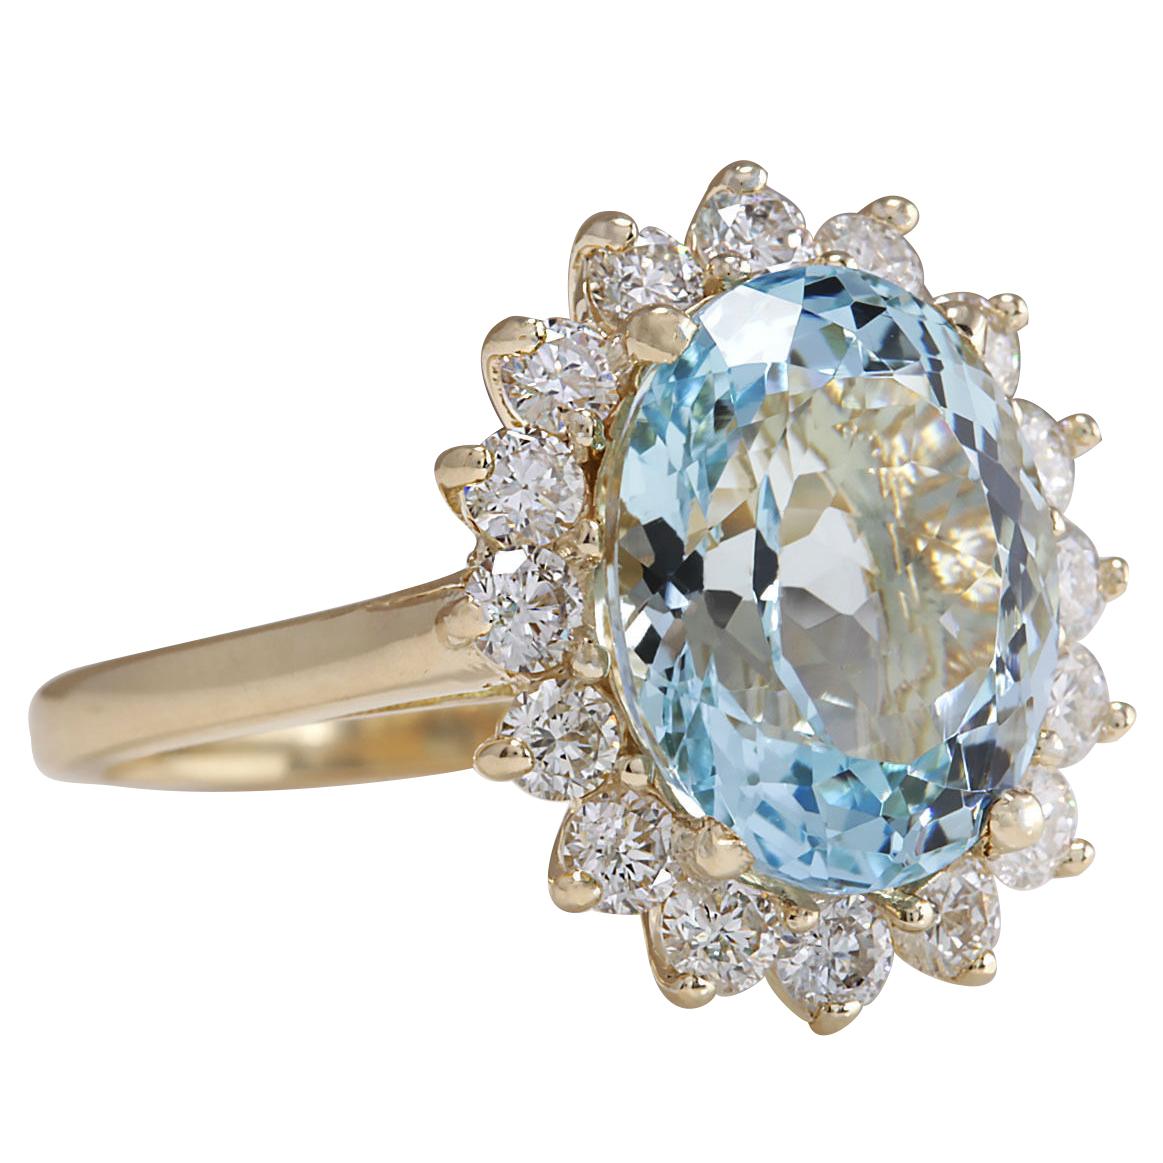 Stamped: 14K Yellow Gold
Total Ring Weight: 5.0 Grams
Total Natural Aquamarine Weight is 5.44 Carat (Measures: 12.00x10.00 mm)
Color: Blue
Total Natural Diamond Weight is 1.06 Carat
Color: F-G, Clarity: VS2-SI1
Face Measures: 17.90x15.50 mm
Sku: